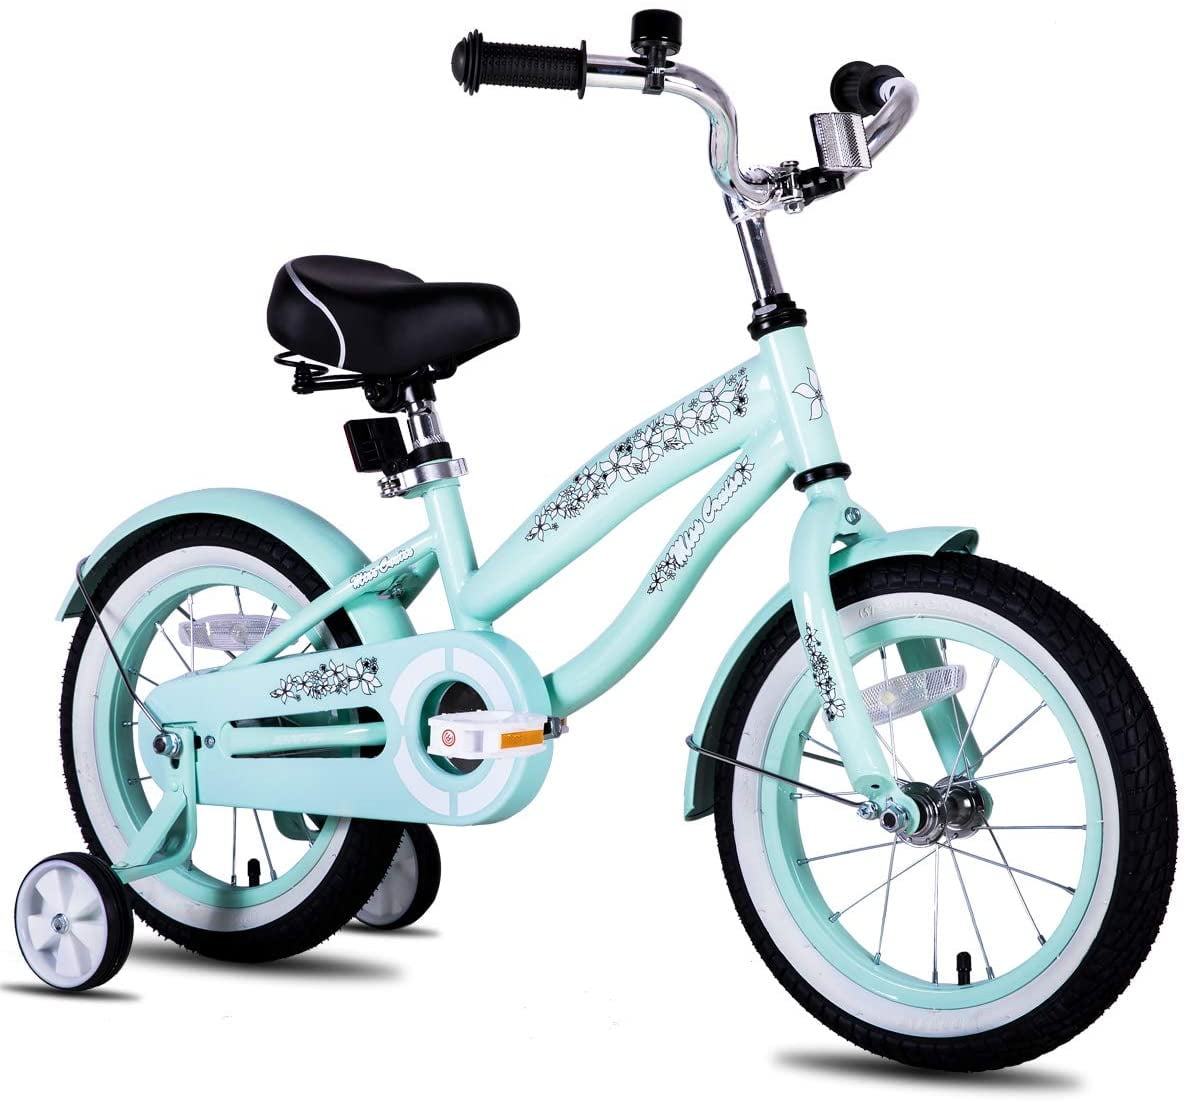 JoyStar 12 14 16 Inch Kids Bike with Coaster Brake & Training Wheels for Ages 3-7 Years Old Boys & Girls 85% Assembled 